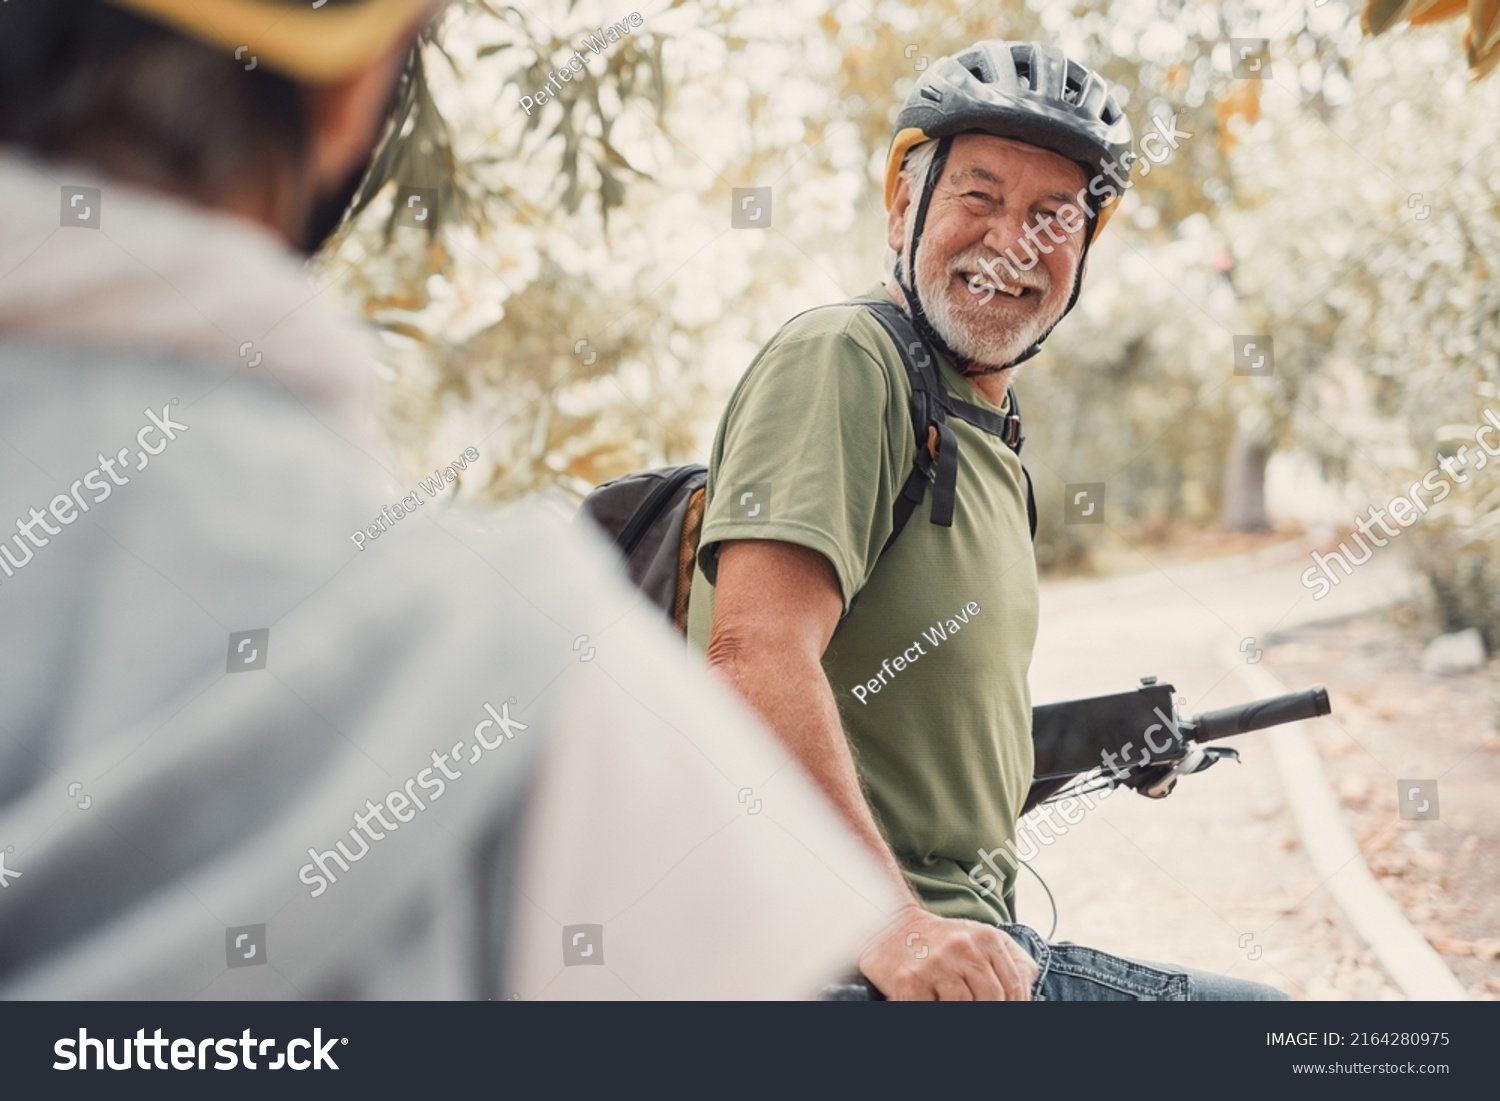 Two happy old mature people enjoying and riding bikes together to be fit and healthy outdoors. Active seniors having fun training in nature. Portrait of one old man smiling in a bike trip with wife #2164280975